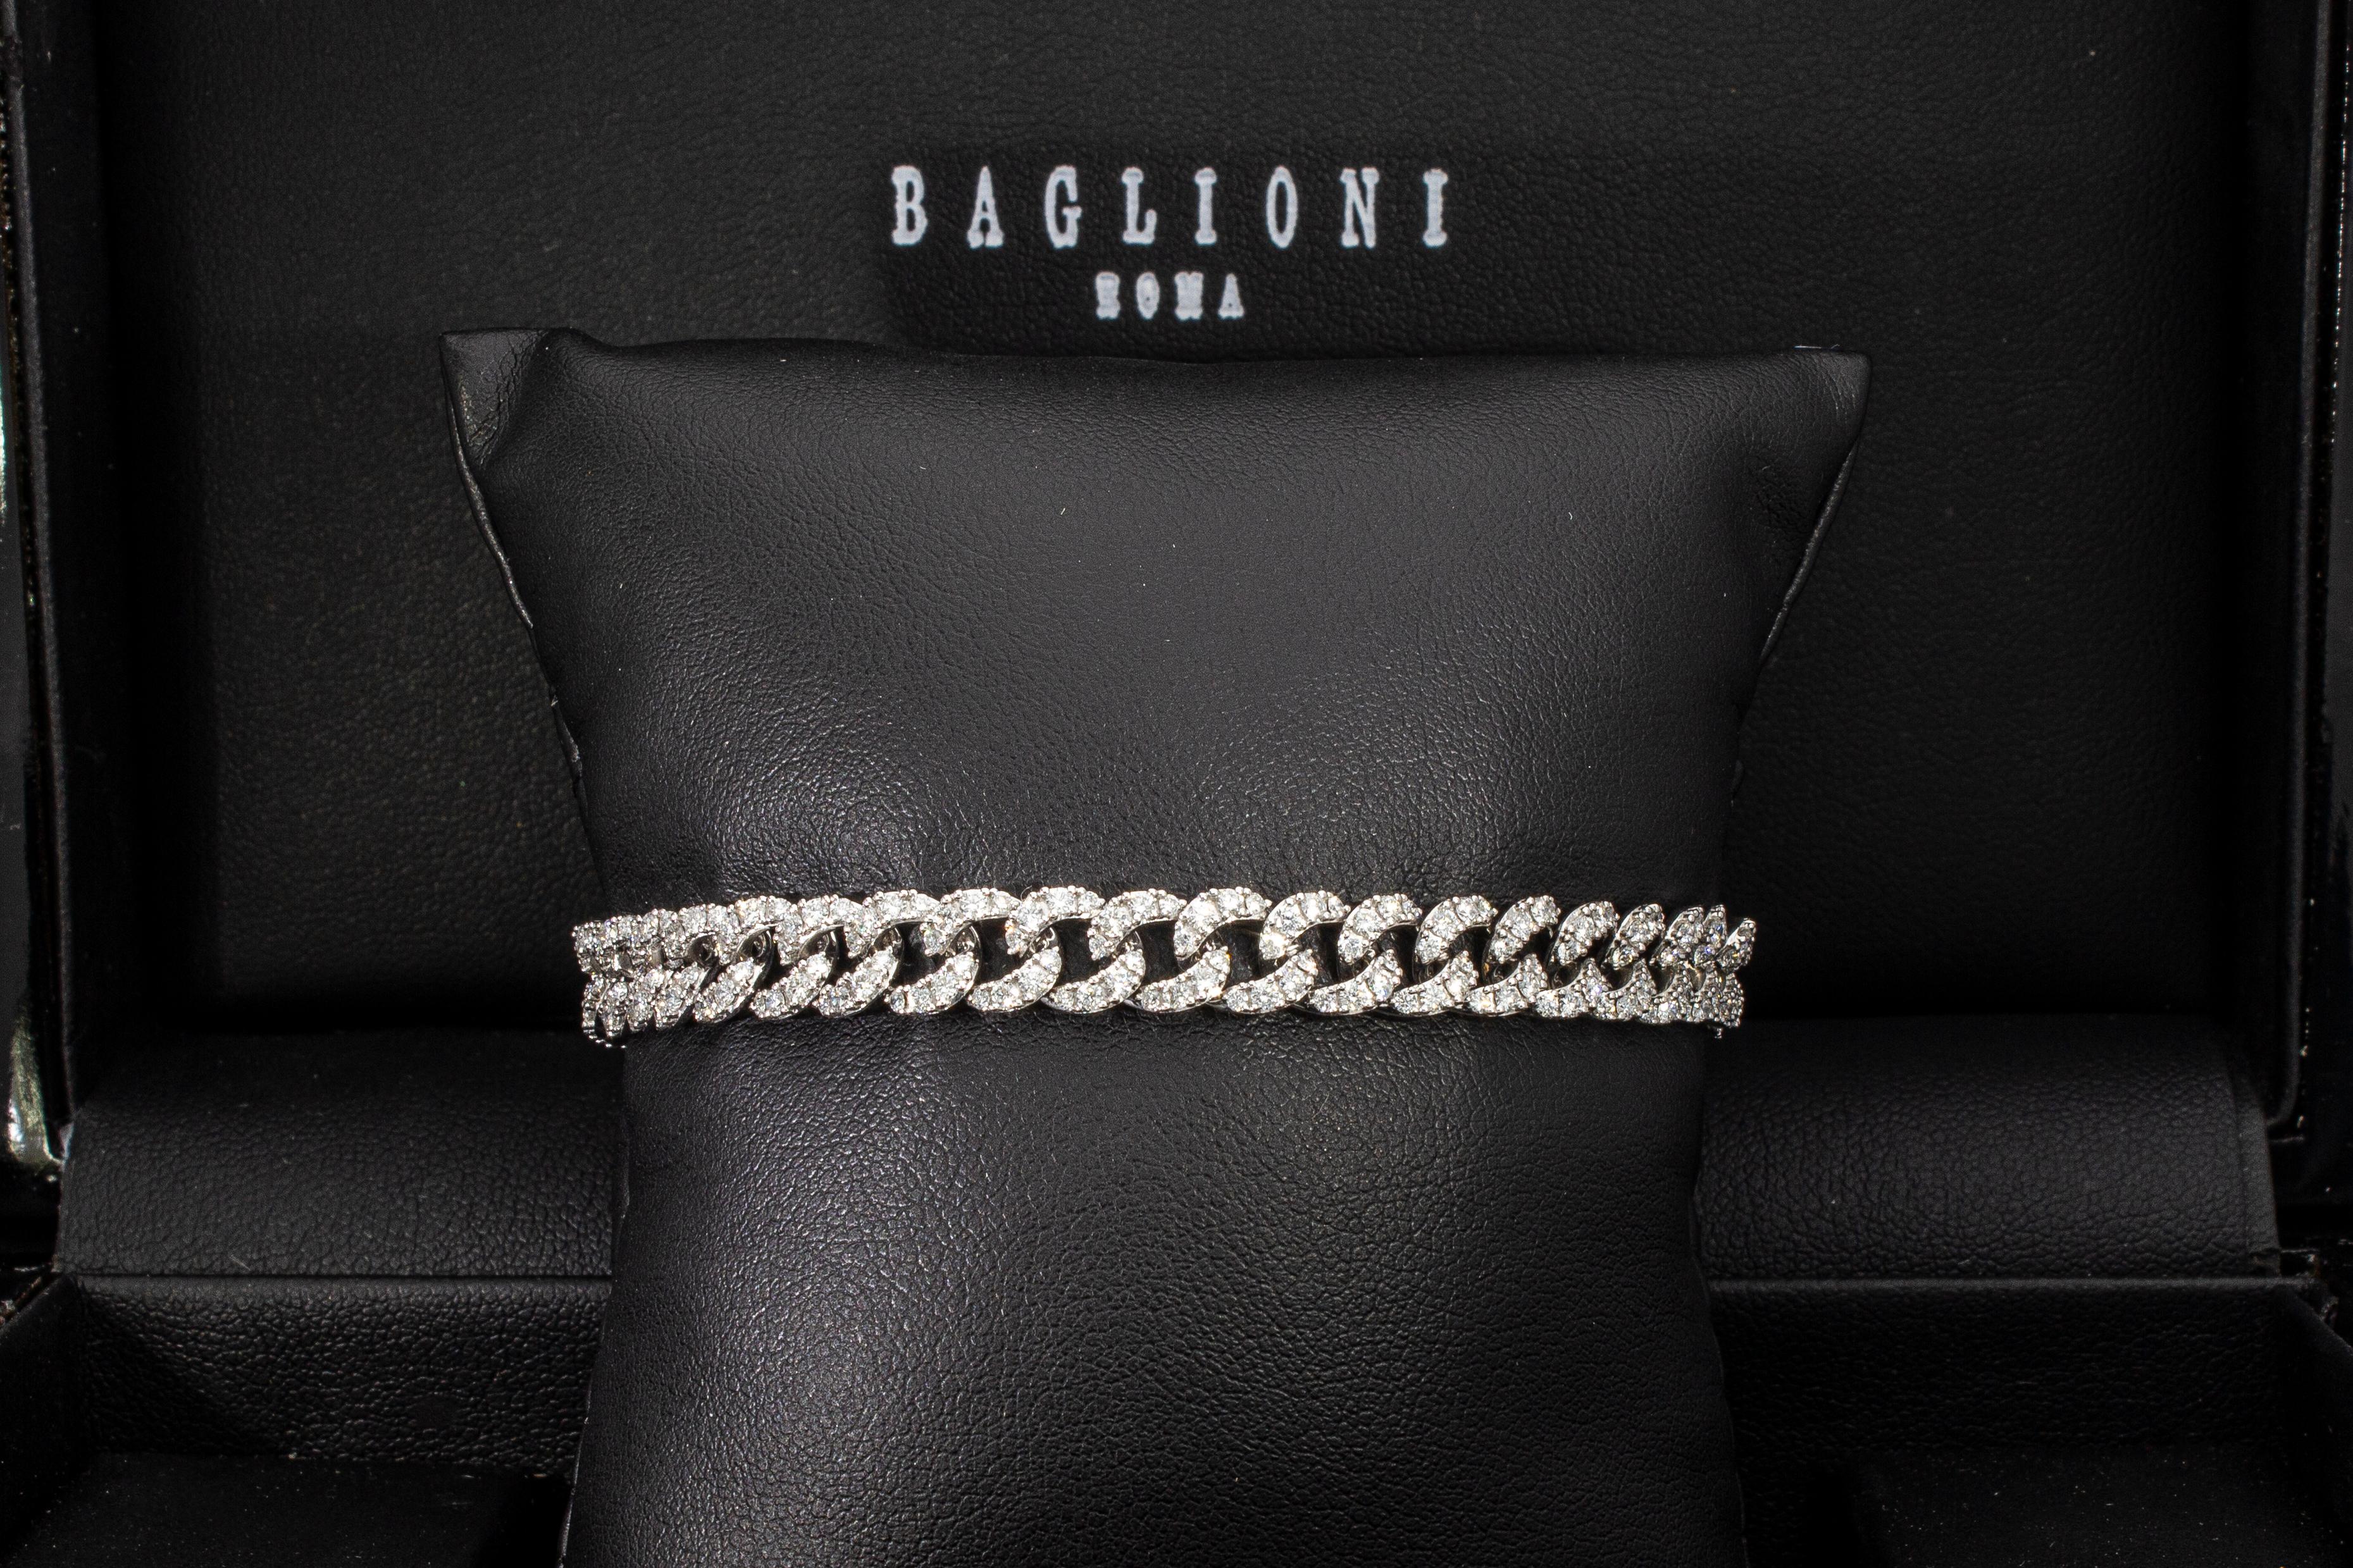 The groumette model bracelet is made up of 40 links set with 320 diamonds, their total carat weight is 3.35 ct.
The bracelet has an invisible closure with two safeties.
The bracelet is in 18 Kt white gold.
Total Carat Weight: ct 3,35
Number of